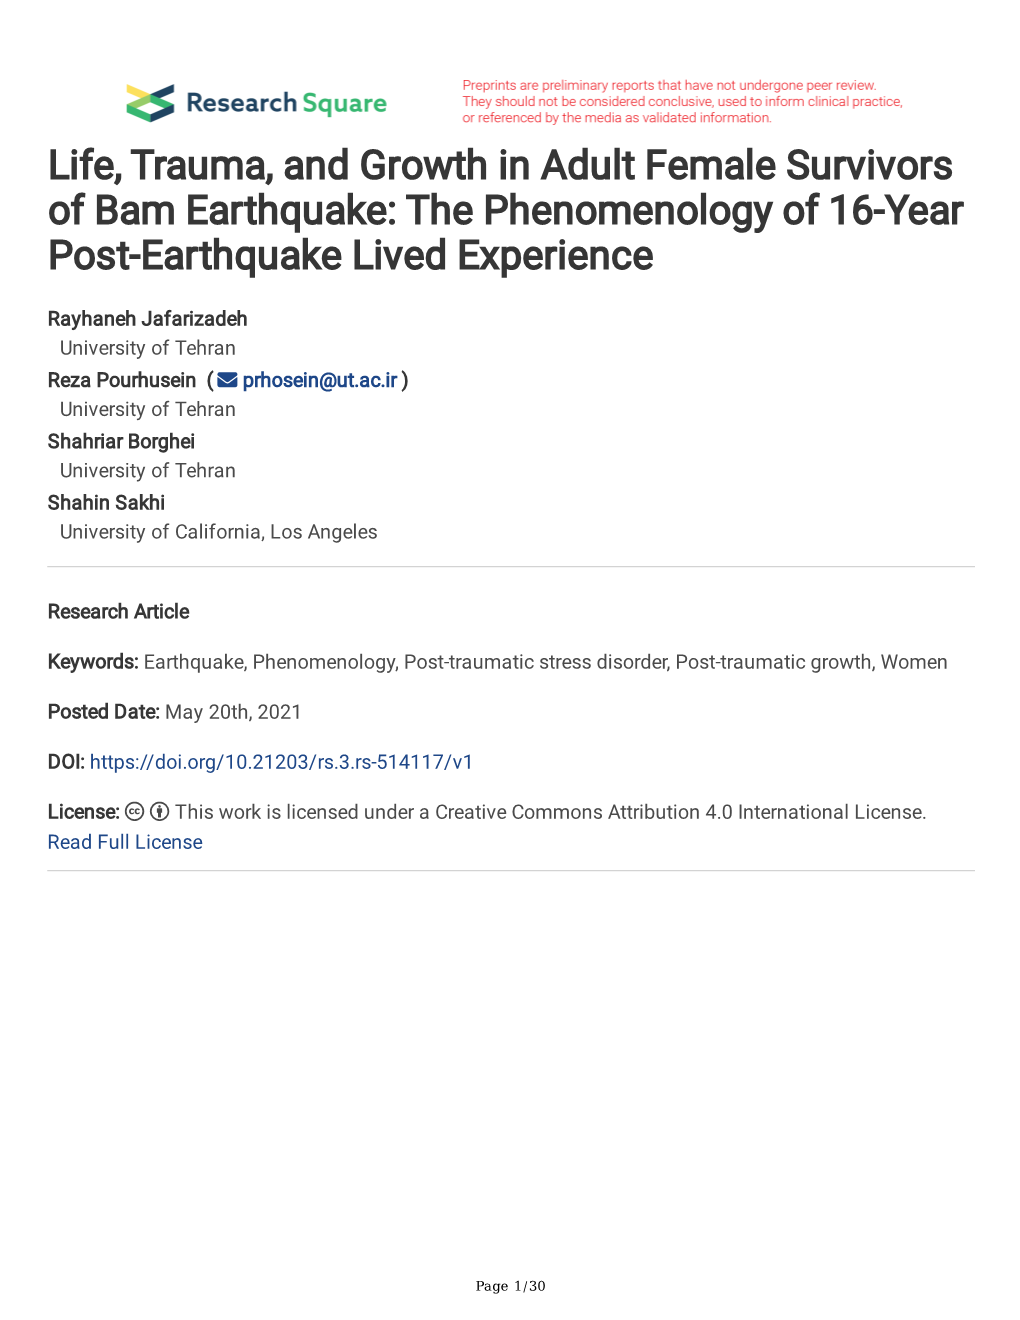 Life, Trauma, and Growth in Adult Female Survivors of Bam Earthquake: the Phenomenology of 16-Year Post-Earthquake Lived Experience